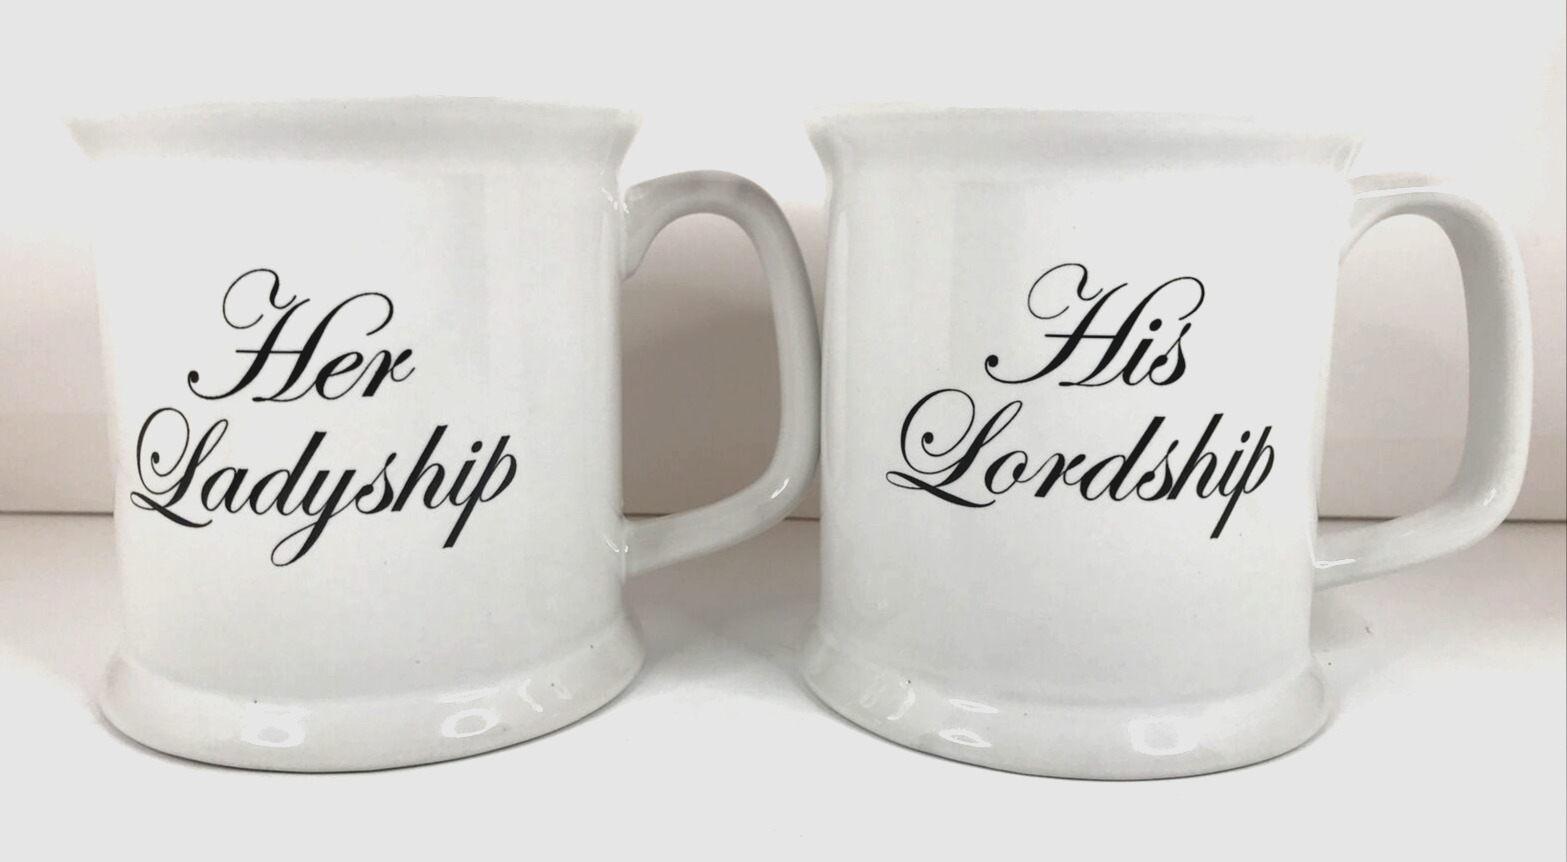 Her Ladyship His Lordship Coffee Tea Cups Pair Mugs EUC White Black Letters